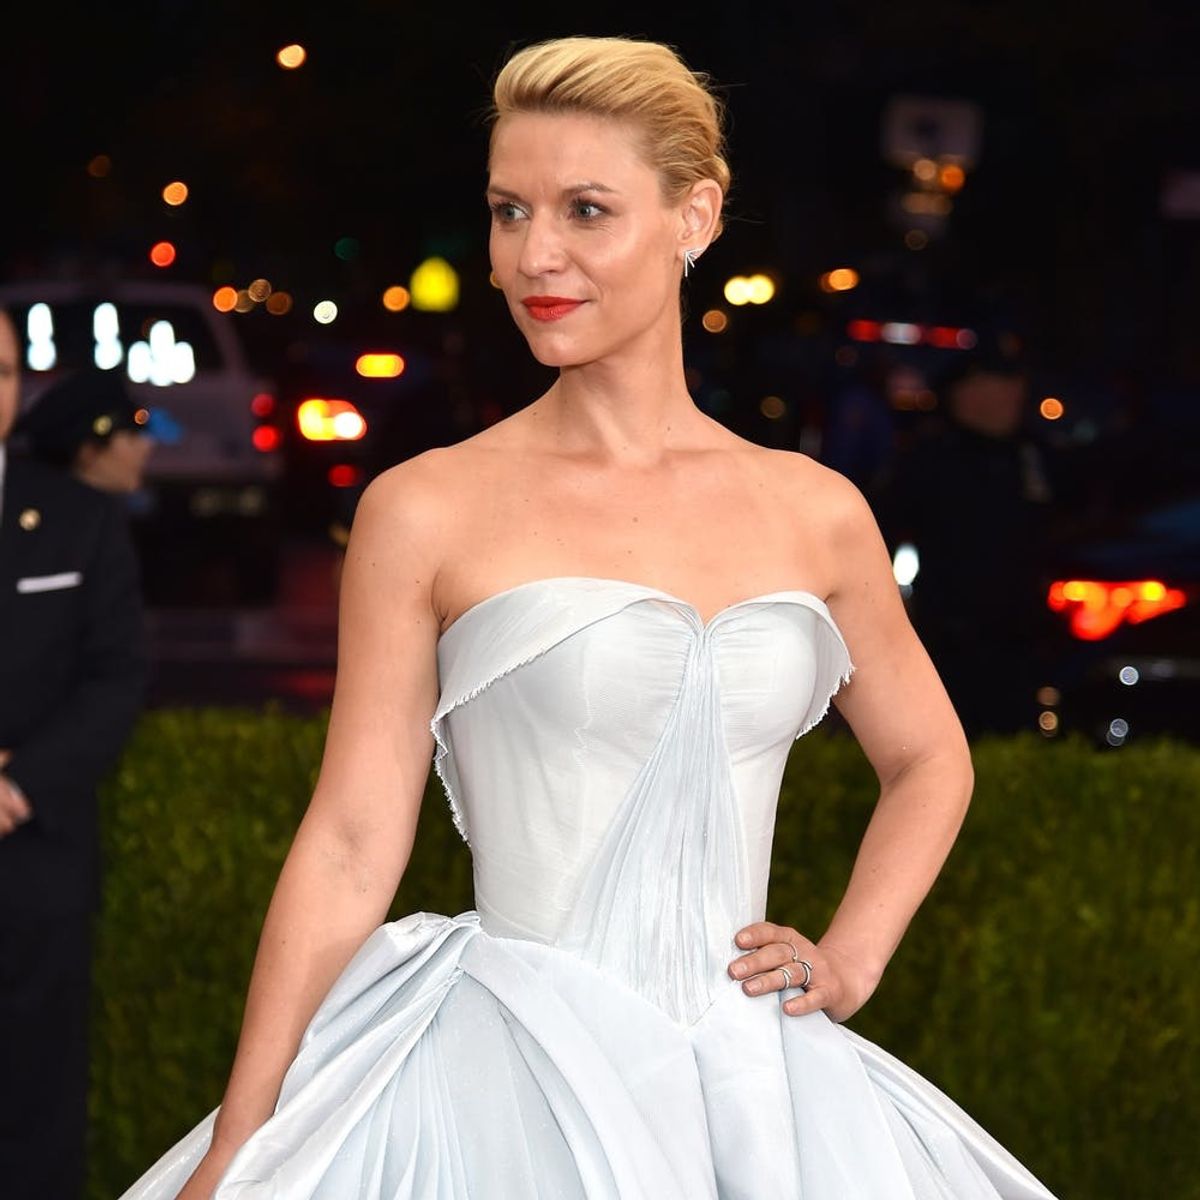 Claire Danes Reveals She’s Pregnant With Baby #2